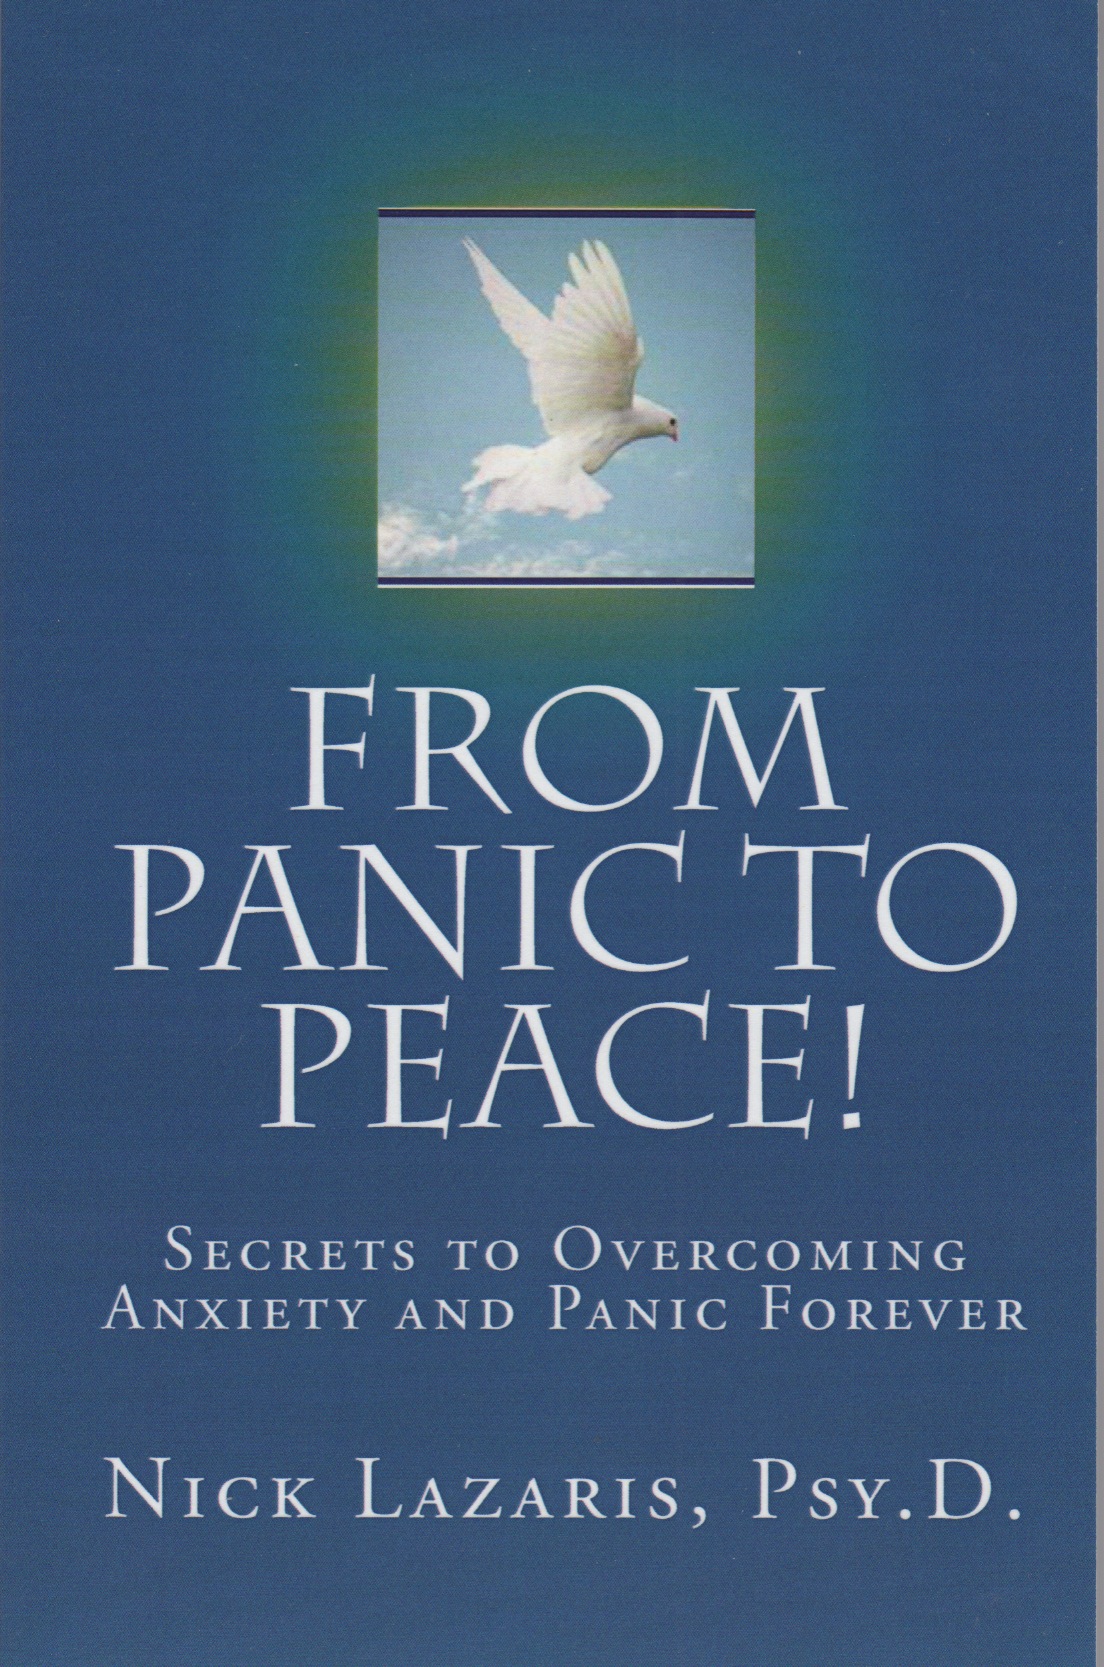 From Panic to Peace